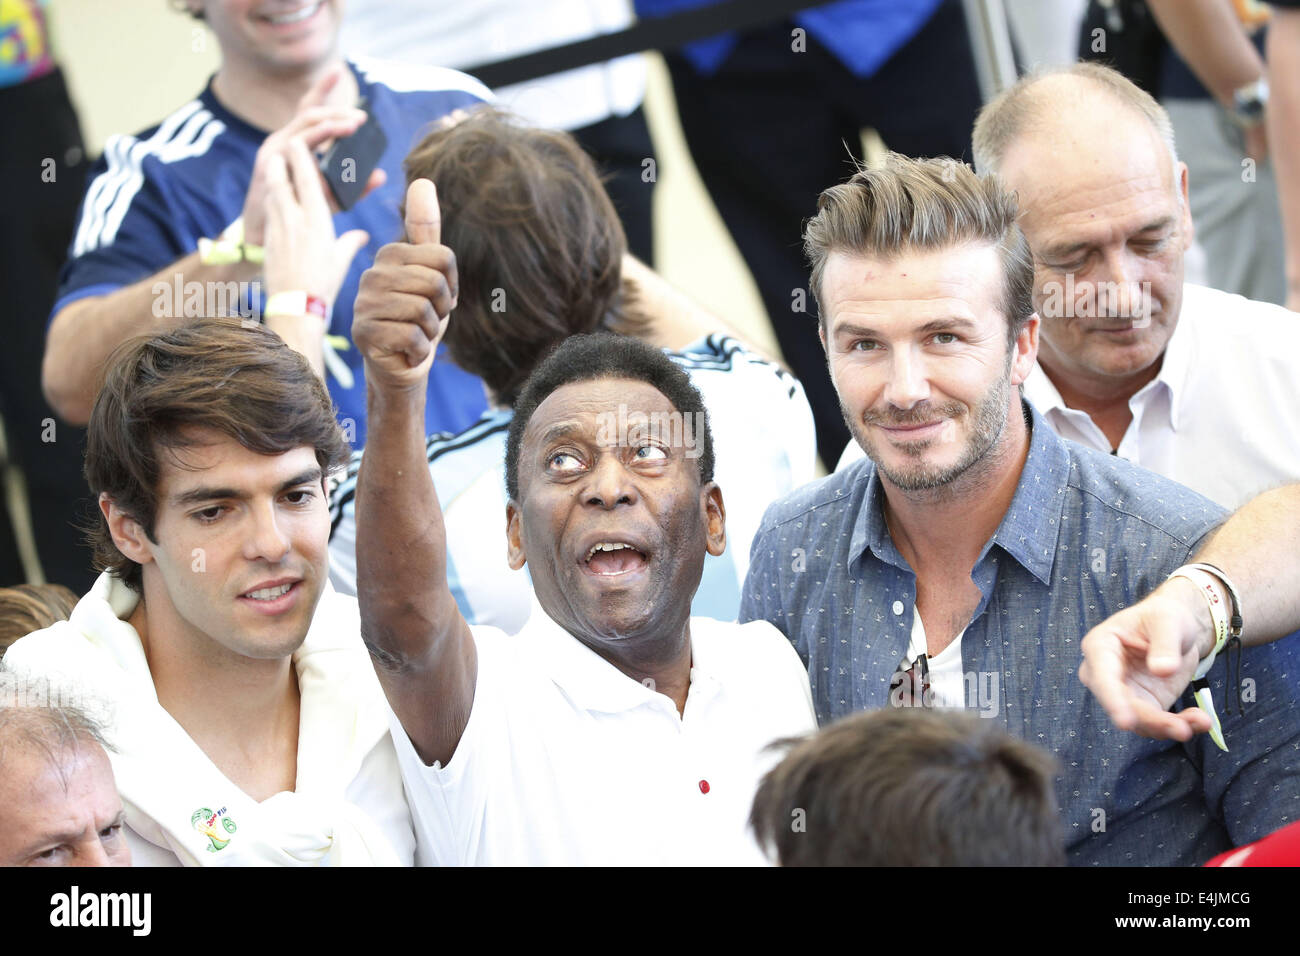 Rio De Janeiro, Brazil. 13th July, 2014. Kaka, Pele, and David Beckham are seen before the final match between Germany and Argentina of 2014 FIFA World Cup at the Estadio do Maracana Stadium in Rio de Janeiro, Brazil, on July 13, 2014. Credit:  Liao Yujie/Xinhua/Alamy Live News Stock Photo